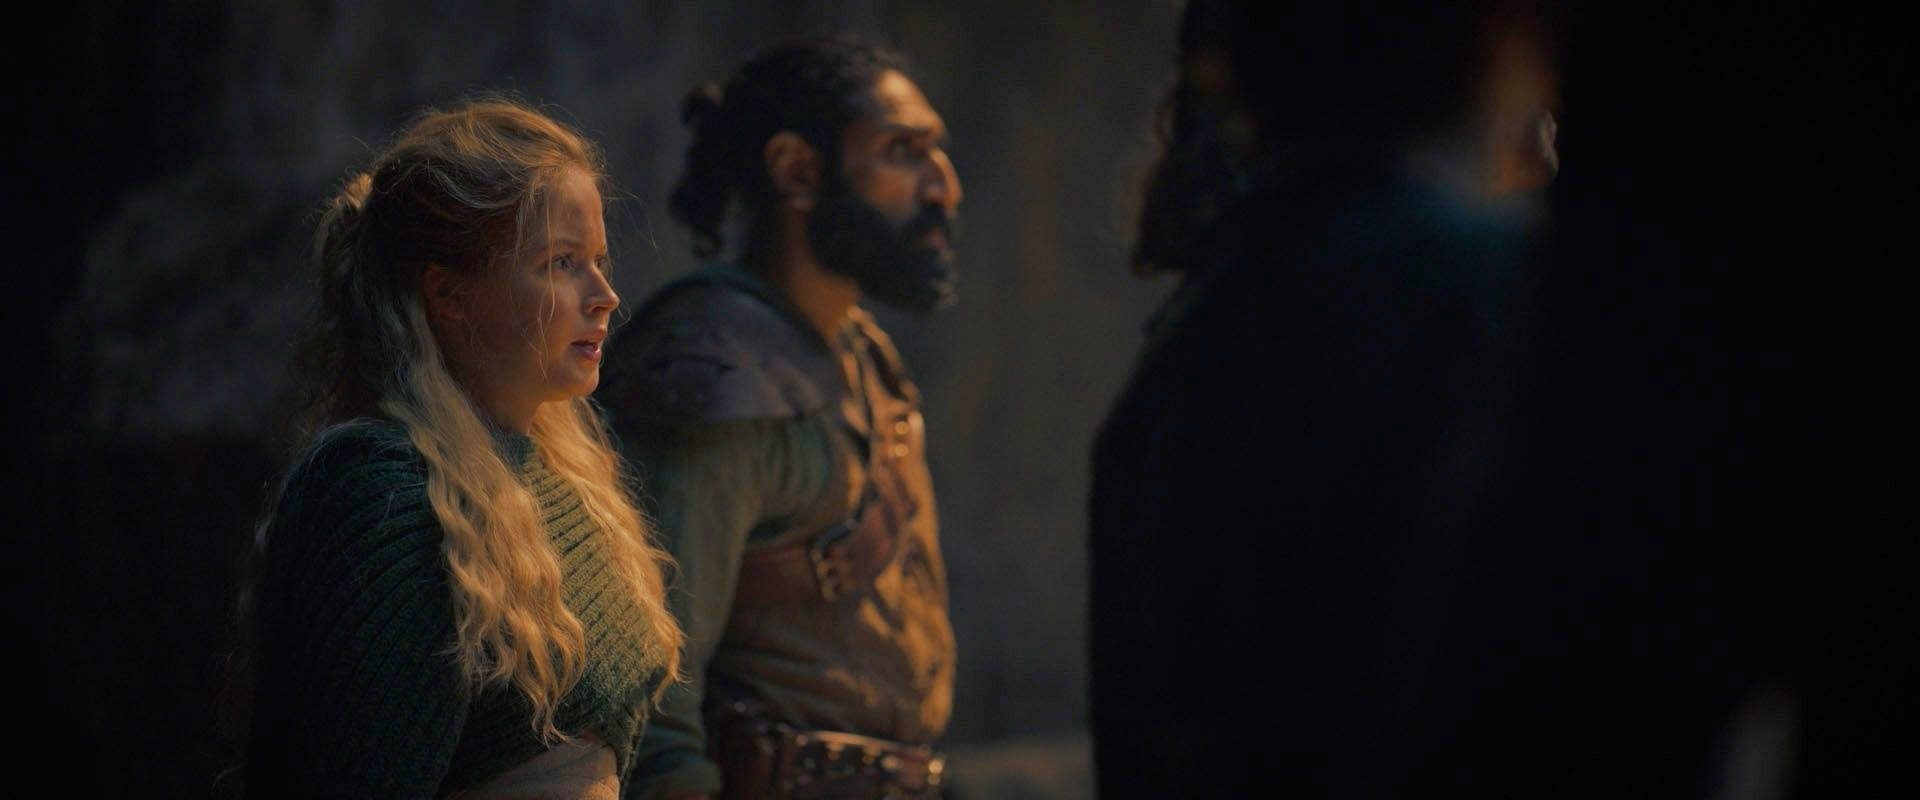 Ellie Bamber and Amar Chadha-Patel in medieval costumes in a scene from the show